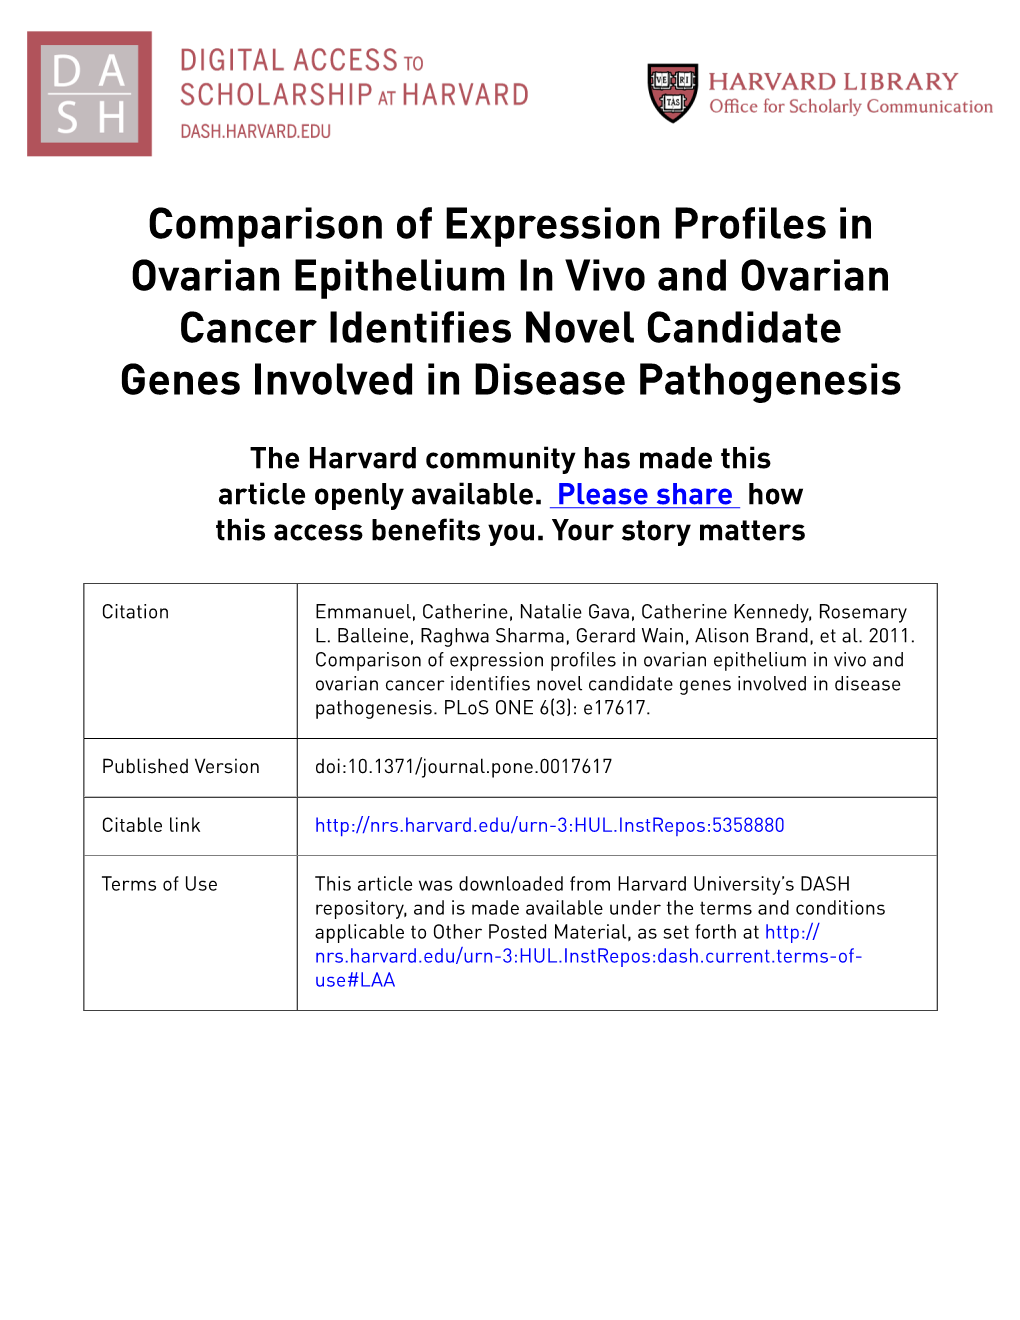 Comparison of Expression Profiles in Ovarian Epithelium in Vivo and Ovarian Cancer Identifies Novel Candidate Genes Involved in Disease Pathogenesis